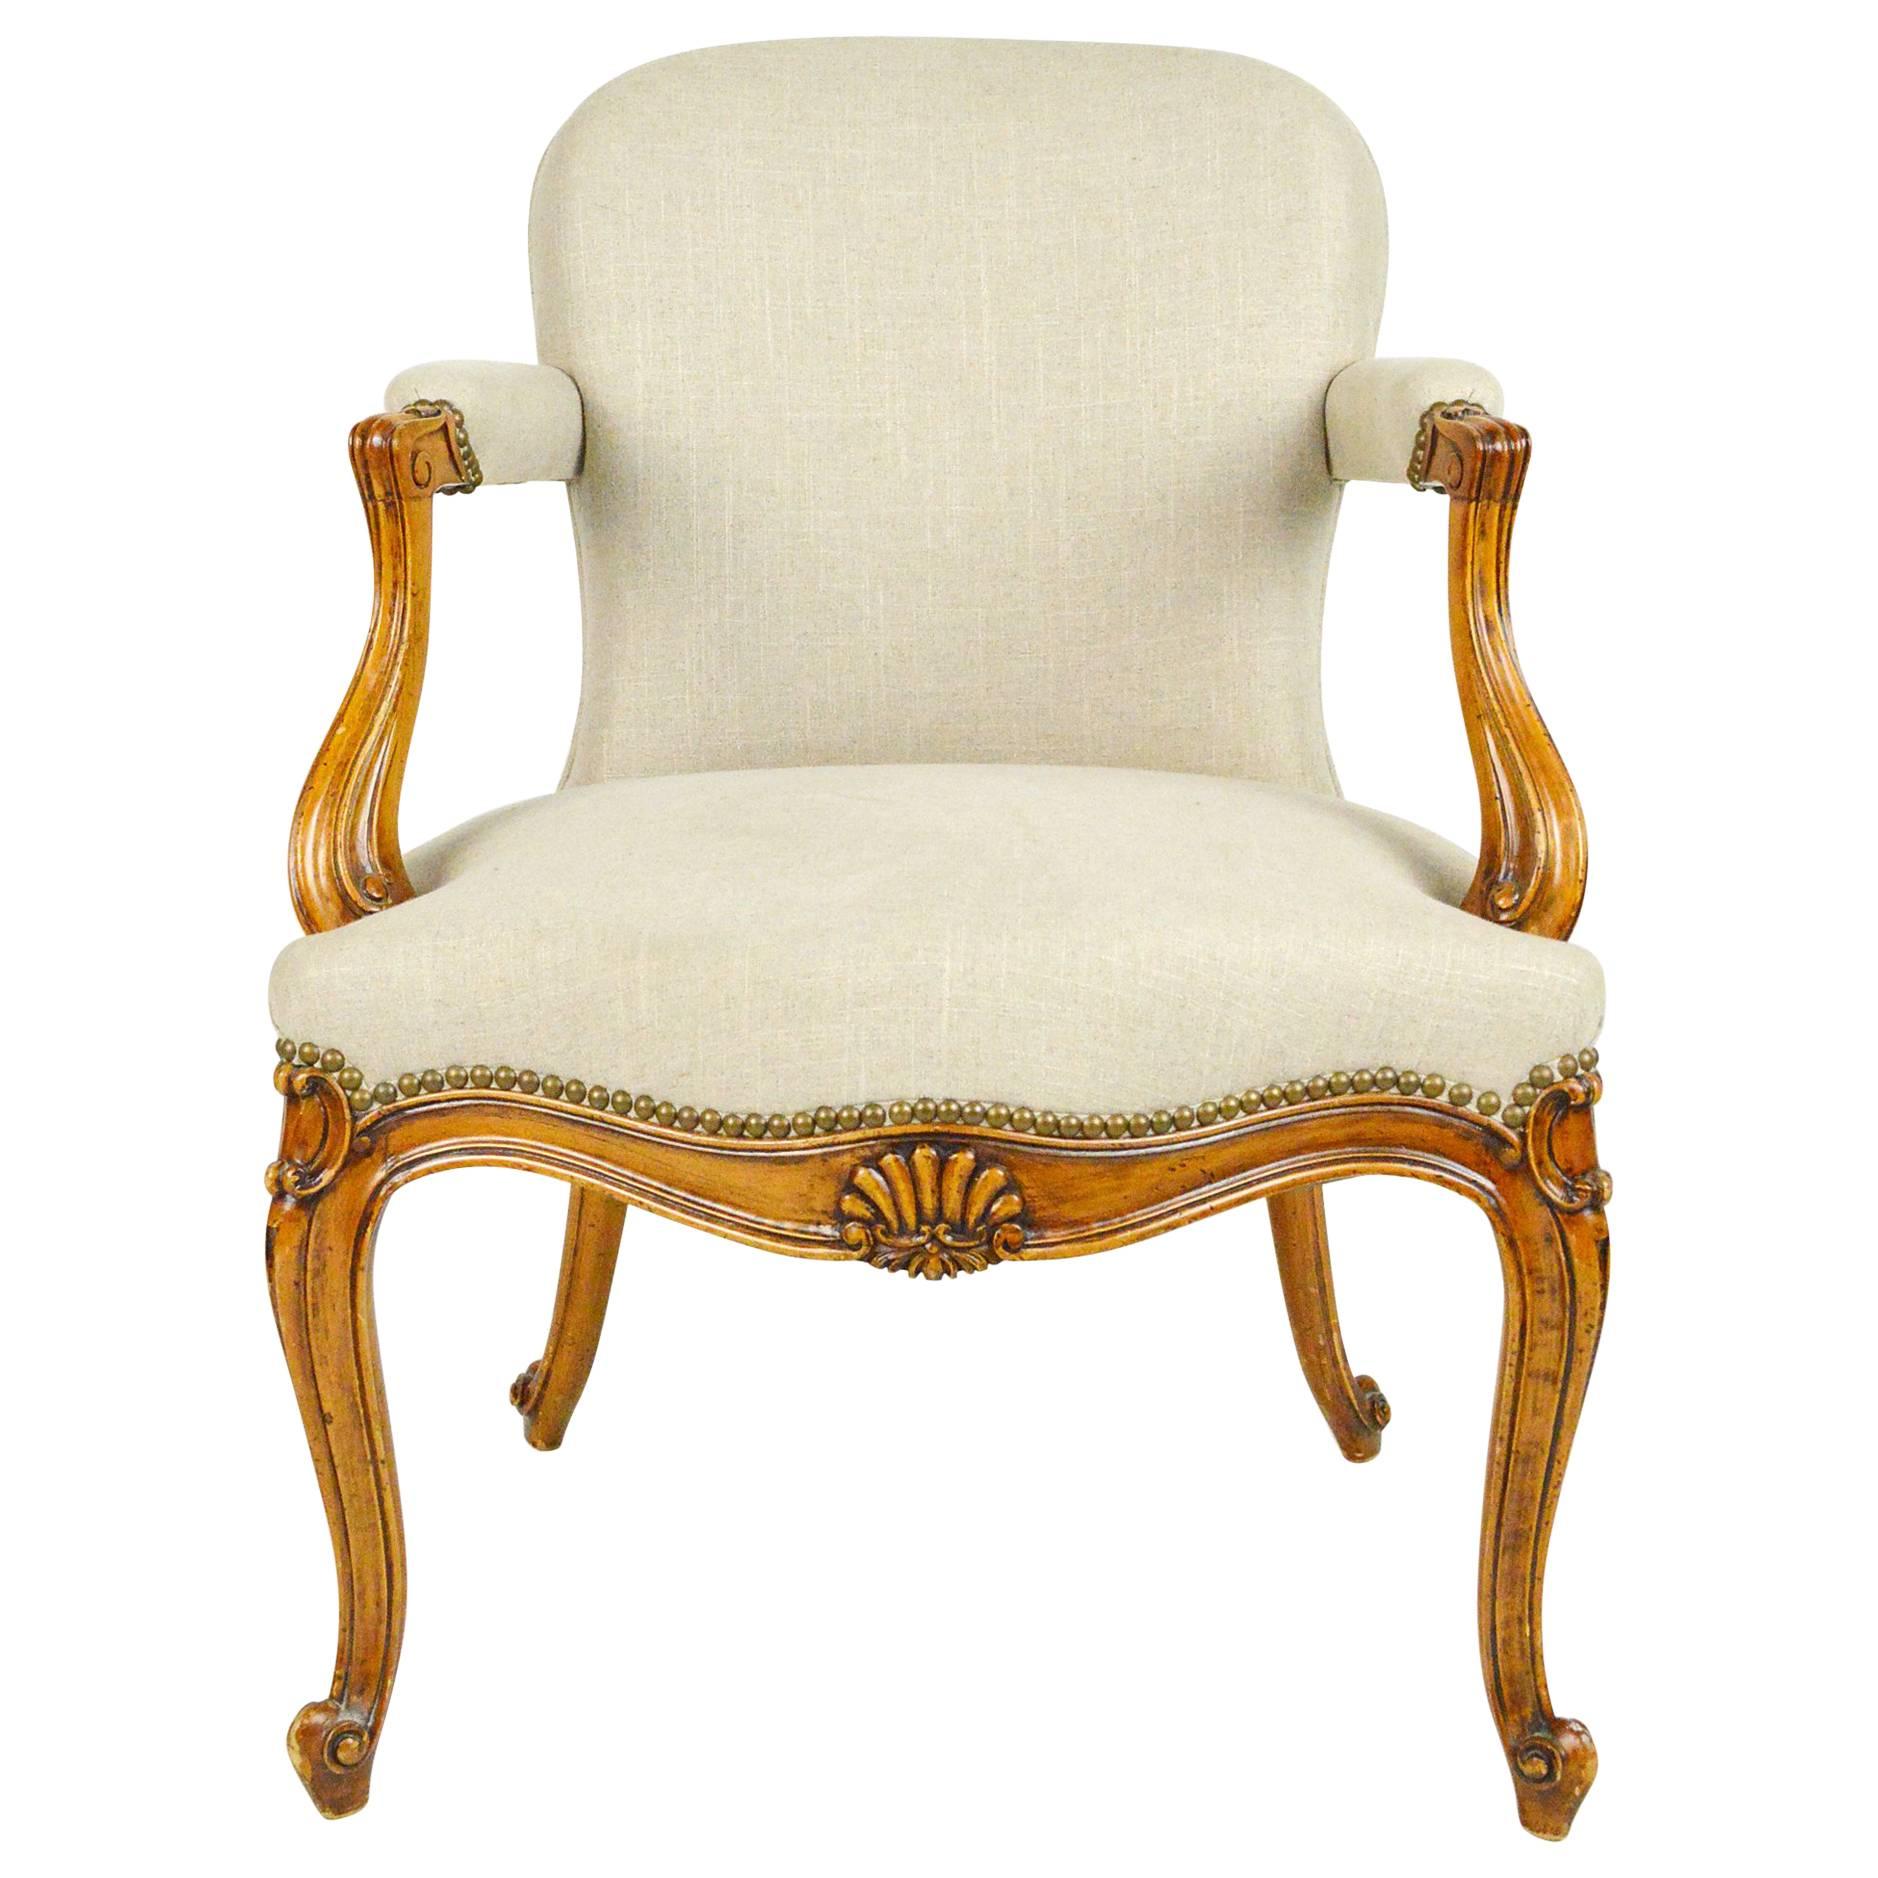 19th Century French Regency Style Carved Open Armchair For Sale